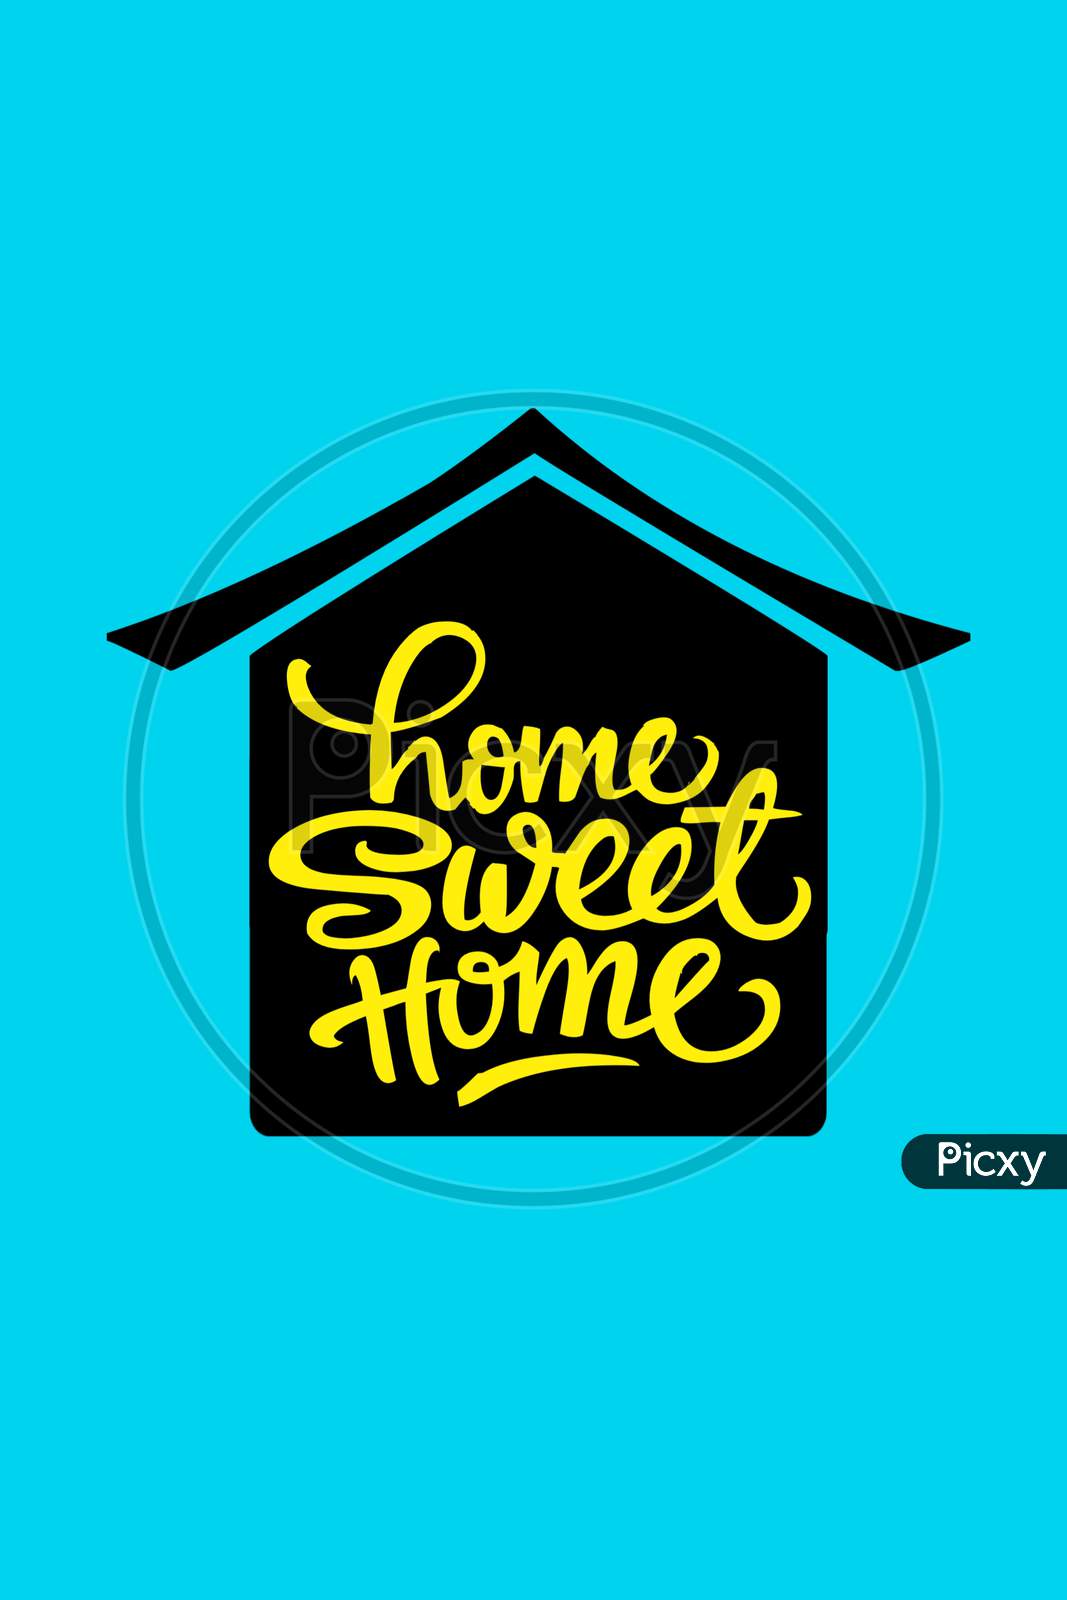 Home Sweet Home (light green background with black color fonts)